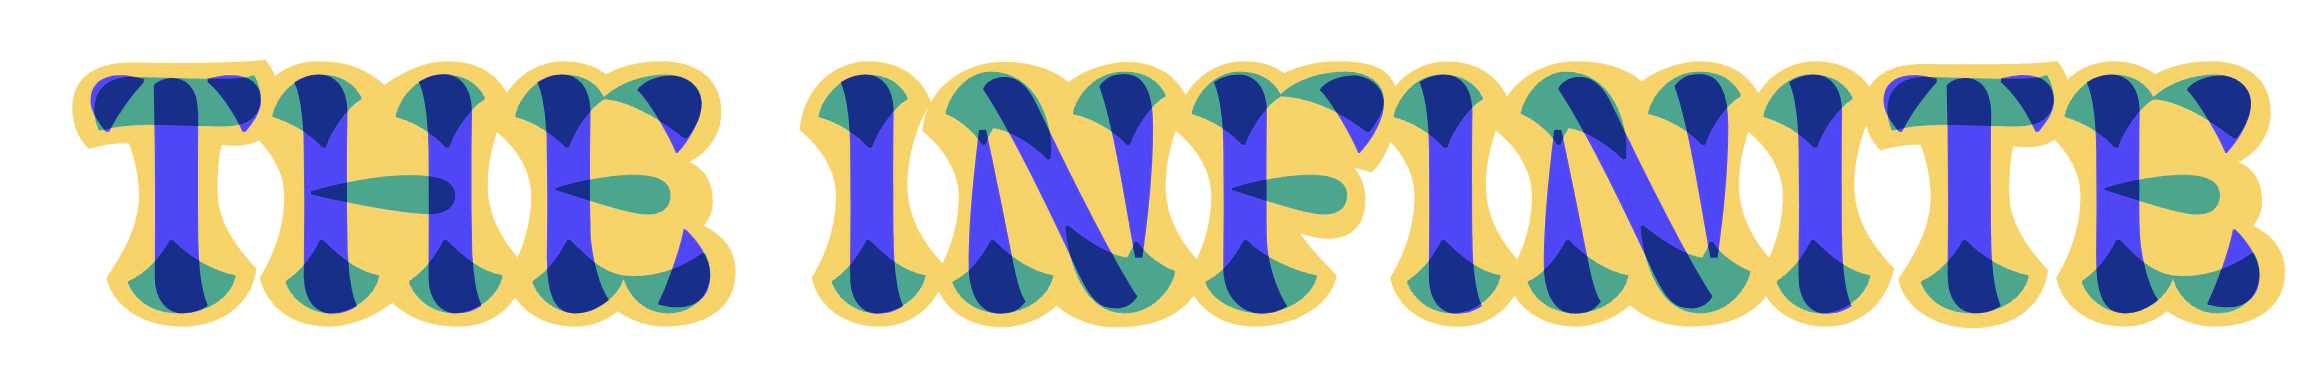 An example of the Surround typeface, showing how multiple letters can be stacked to let the colors of each bleed through